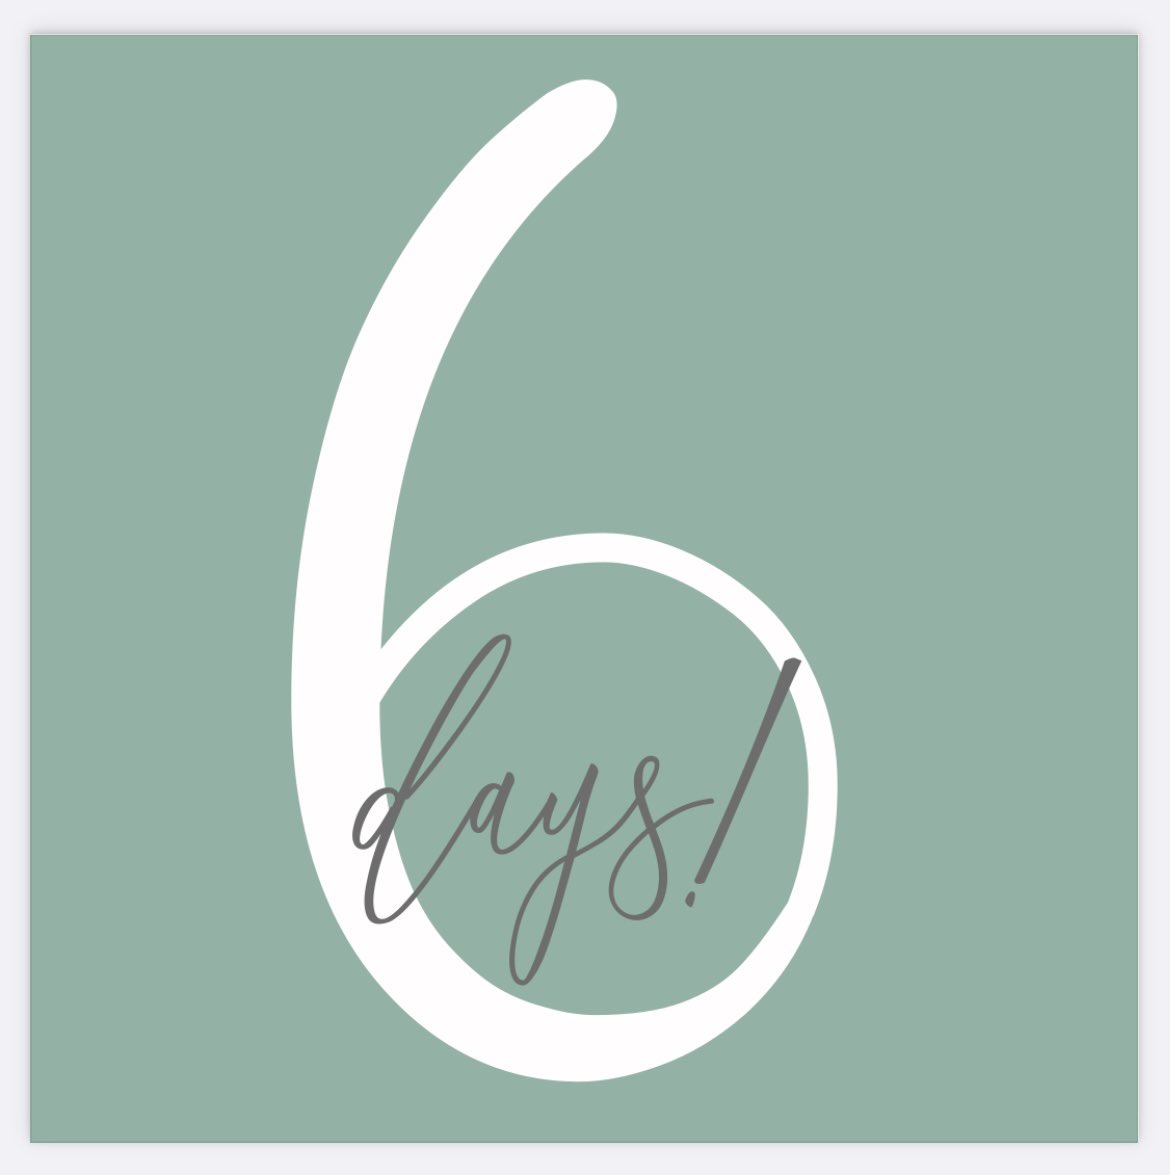 Just six days until we can open our doors again! #countdown #lovelancaster #shoplocal #giftlocal